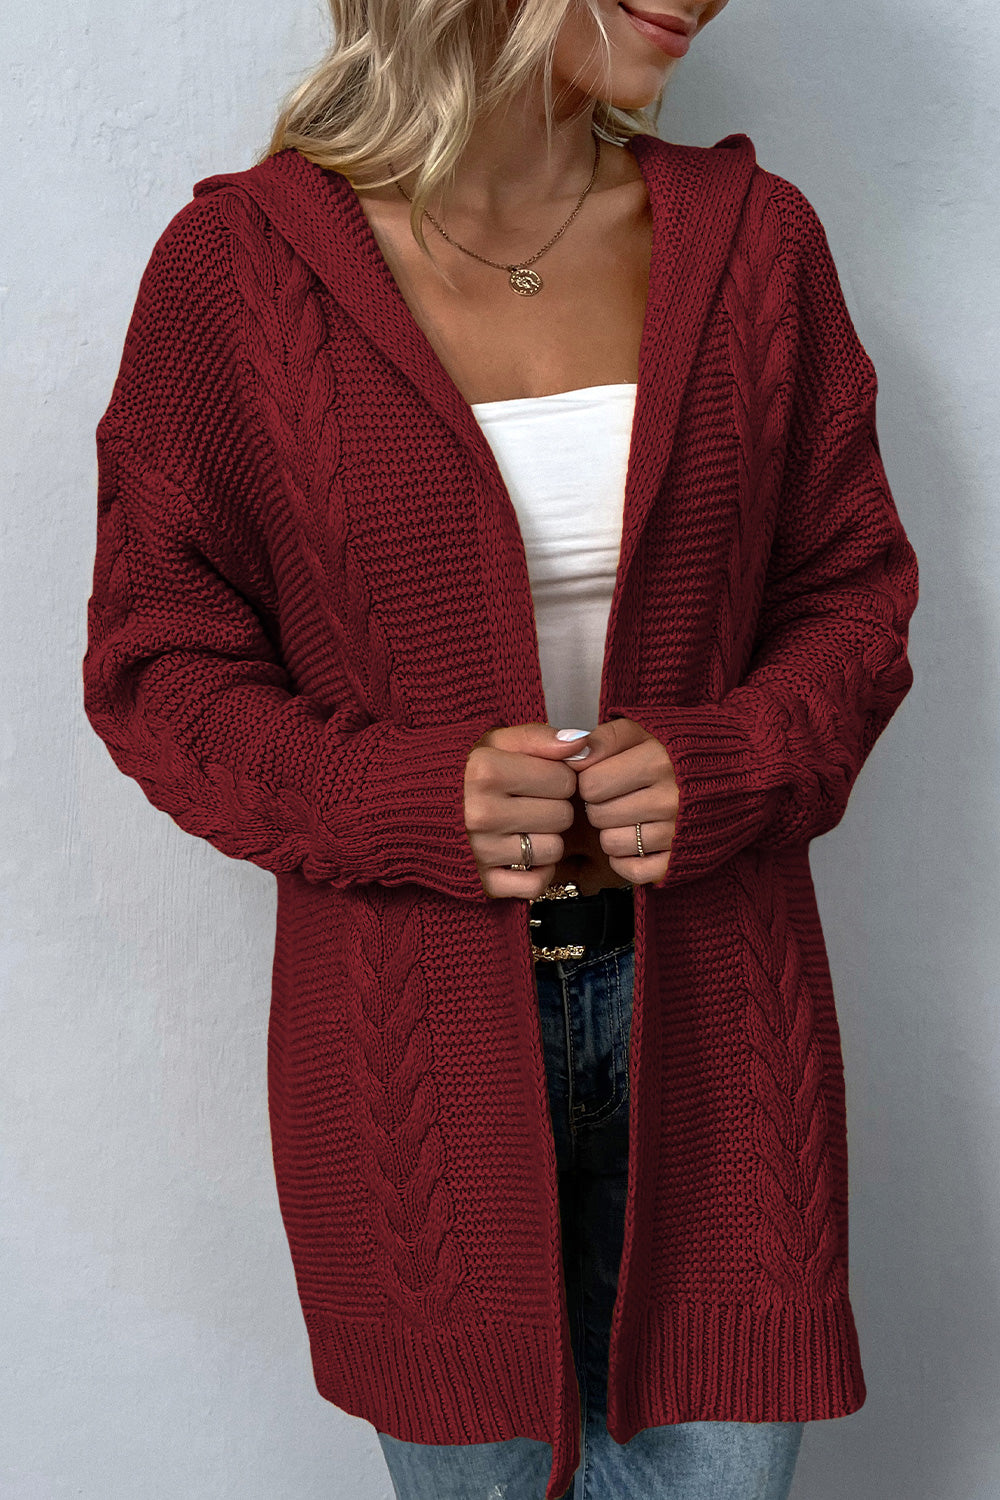 Trendsi Cupid Beauty Supplies Wine / S Woman Cardigan Cable-Knit Dropped Shoulder Hooded Cardigan